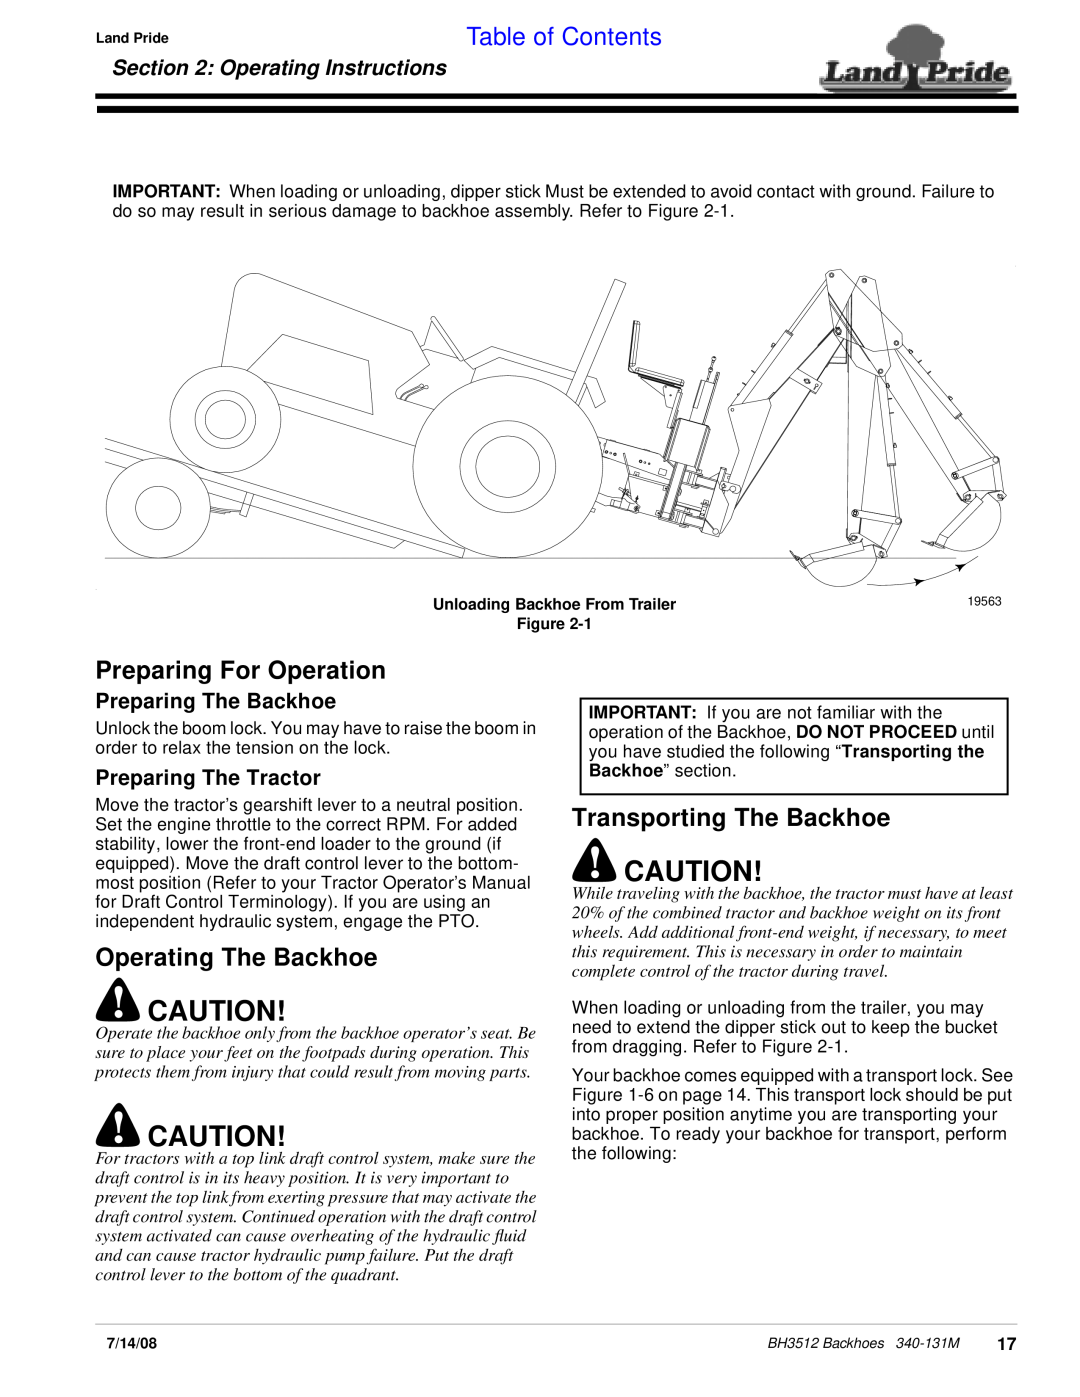 Land Pride BH3512 manual Preparing For Operation, Operating The Backhoe, Transporting The Backhoe, Operating Instructions 